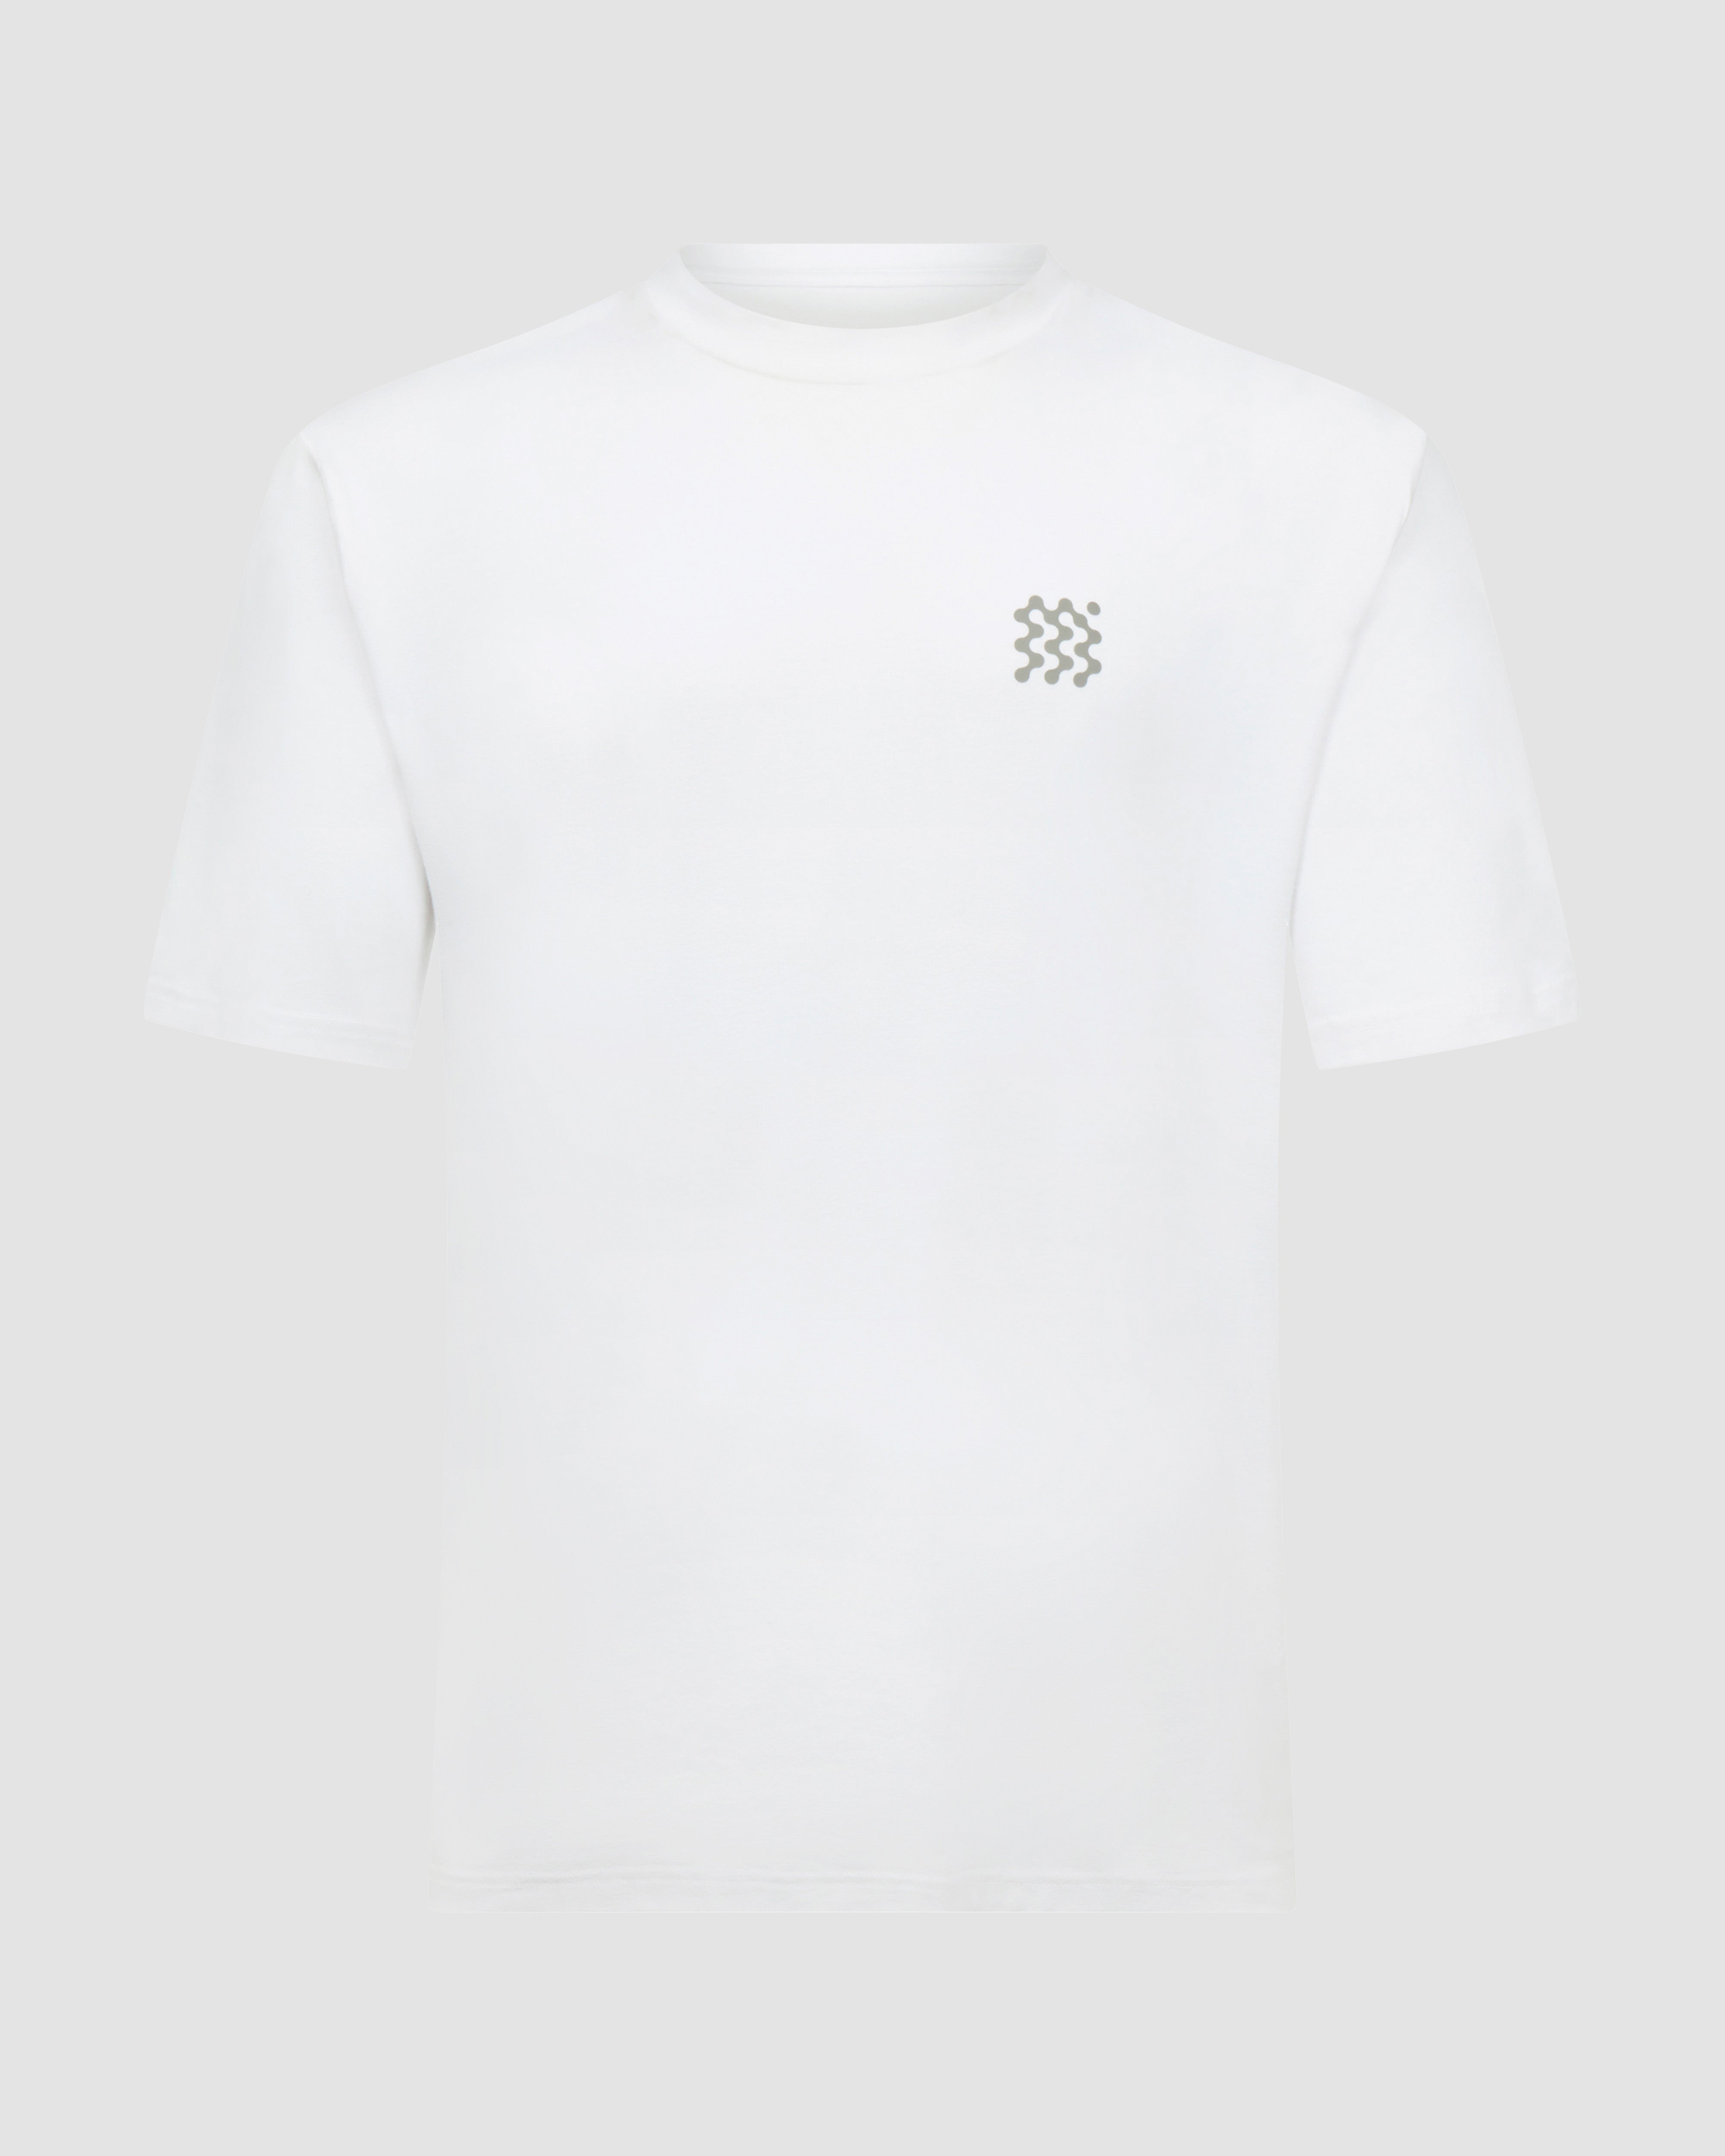 Course Bamboo T-Shirt | Manors Golf